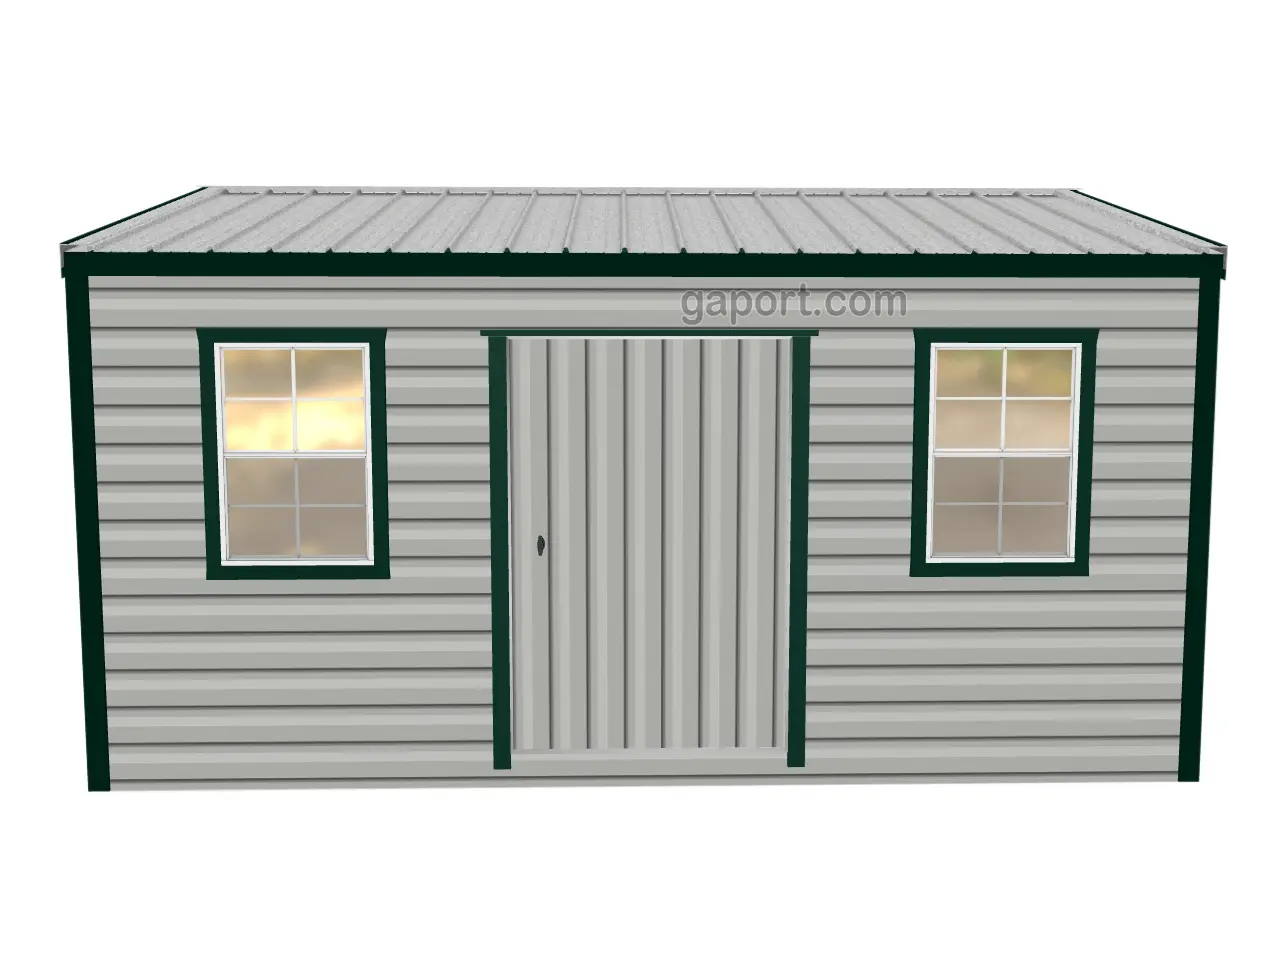 Displayed is a nice economical metal shed with a door, two windows and electrical wiring.